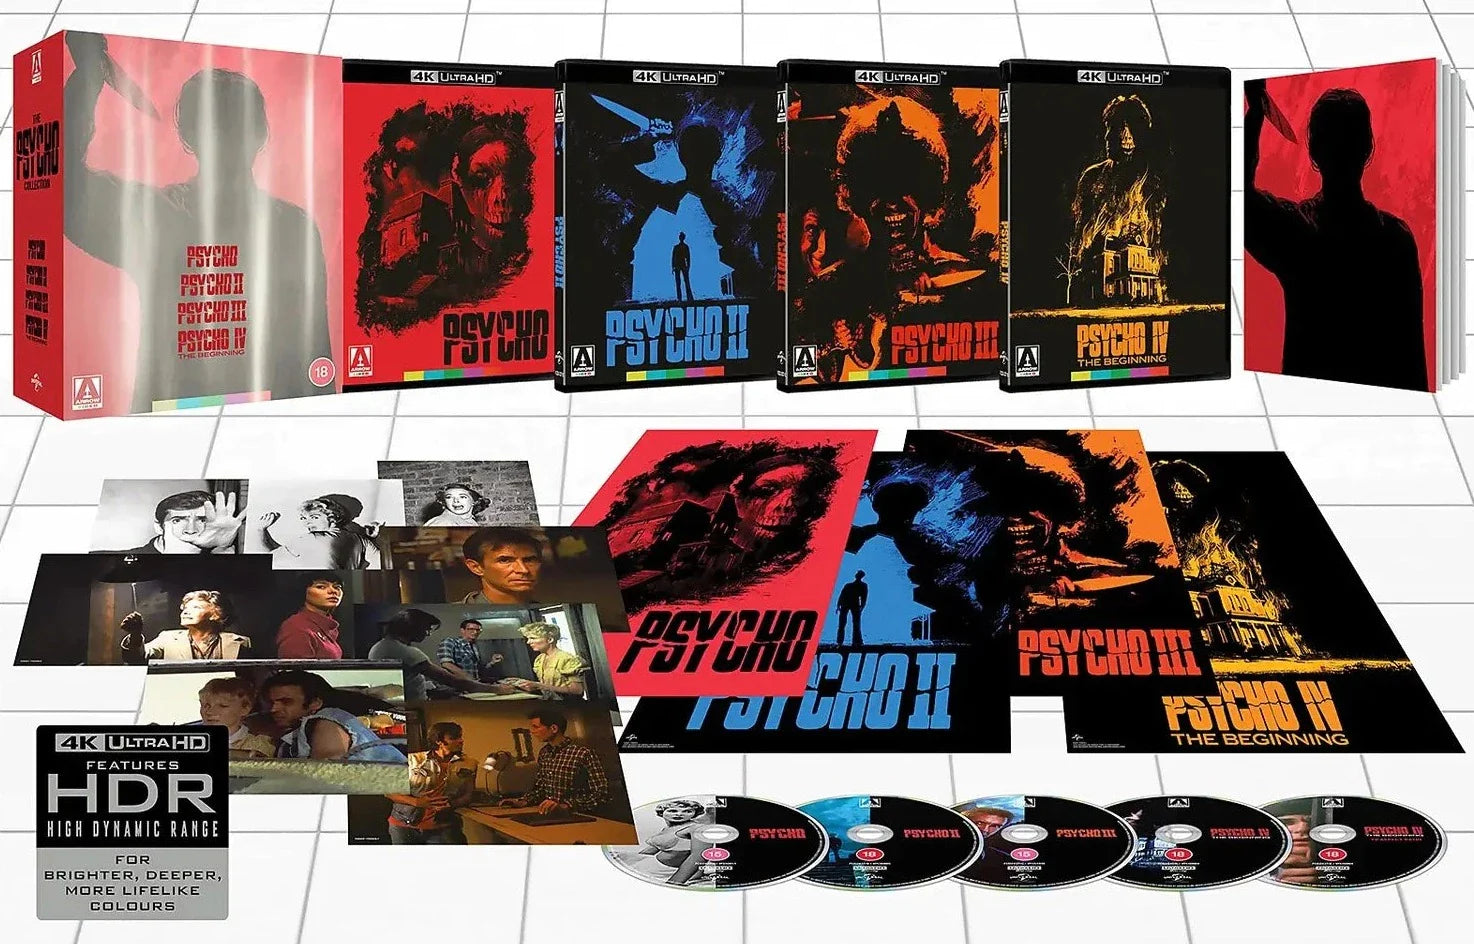 Orbit　Collection　The　UHD,　Limited　Psycho　*one　–　(4K　Free/B)　Edition,　Region　pe　DVD